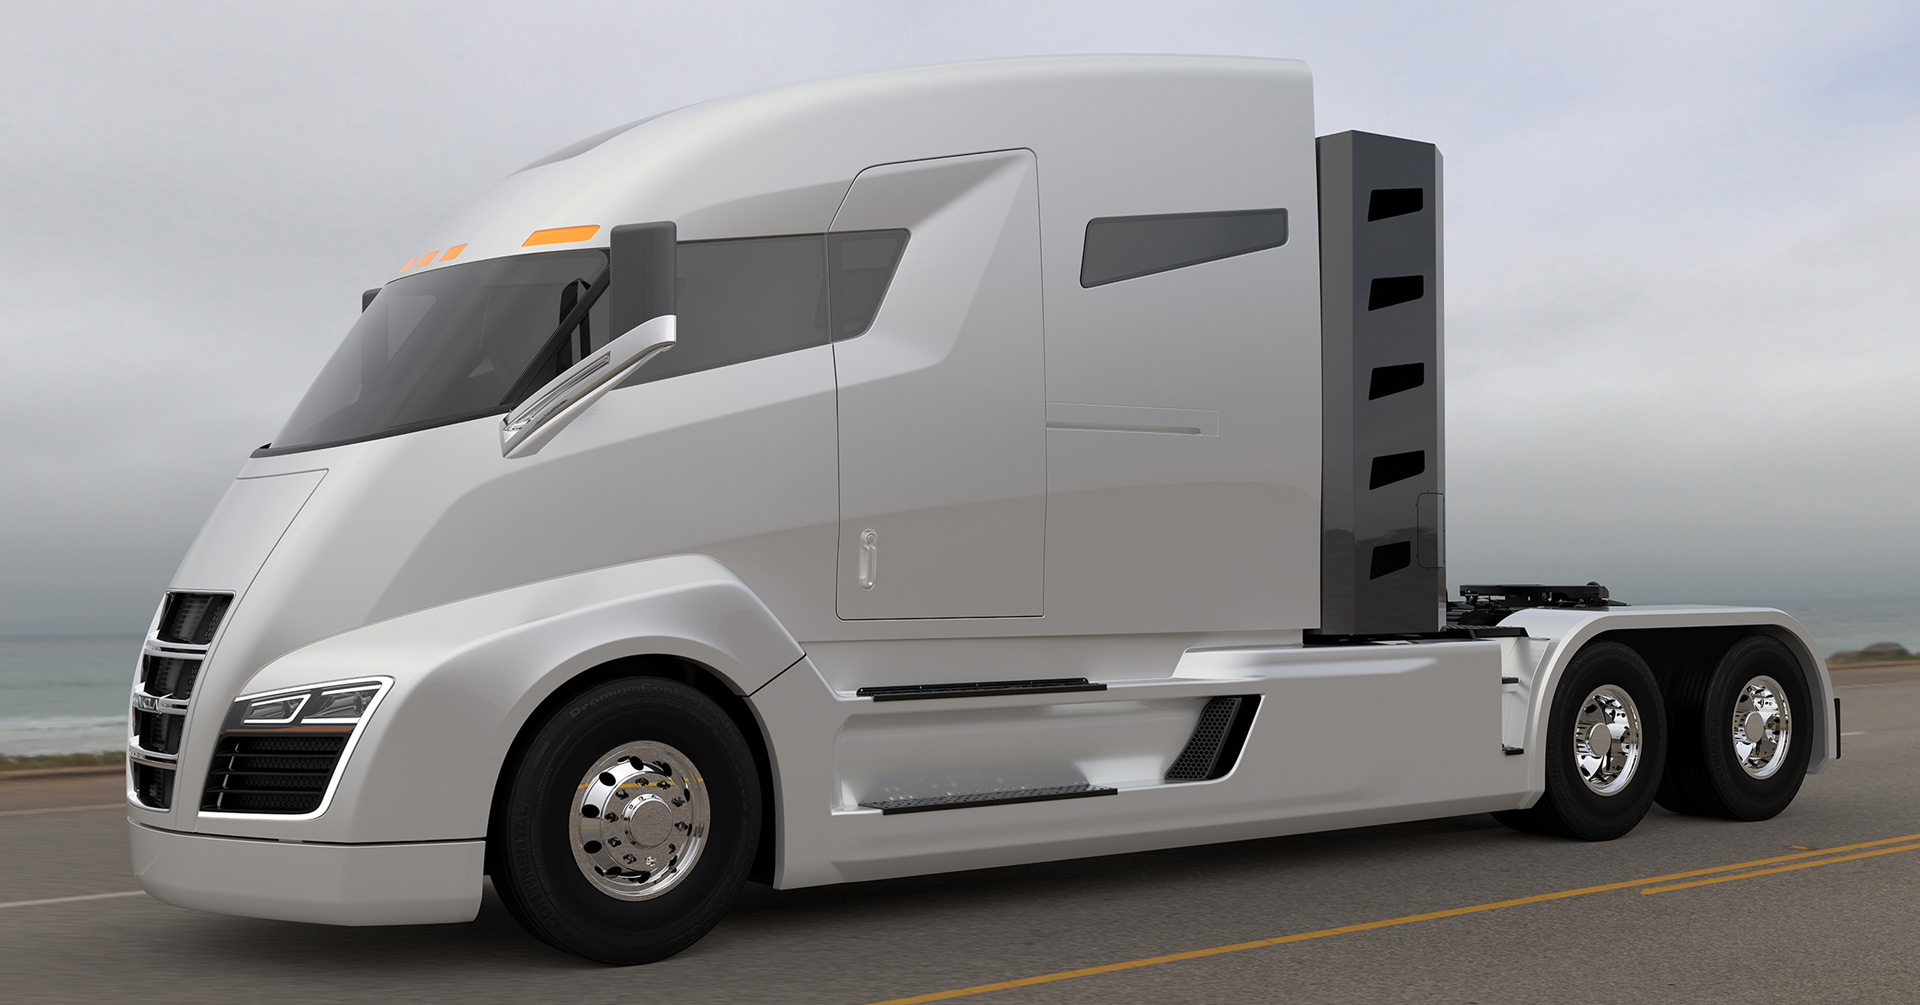 Nikola unveils how its electric truck works custom hydrogen fuel cell